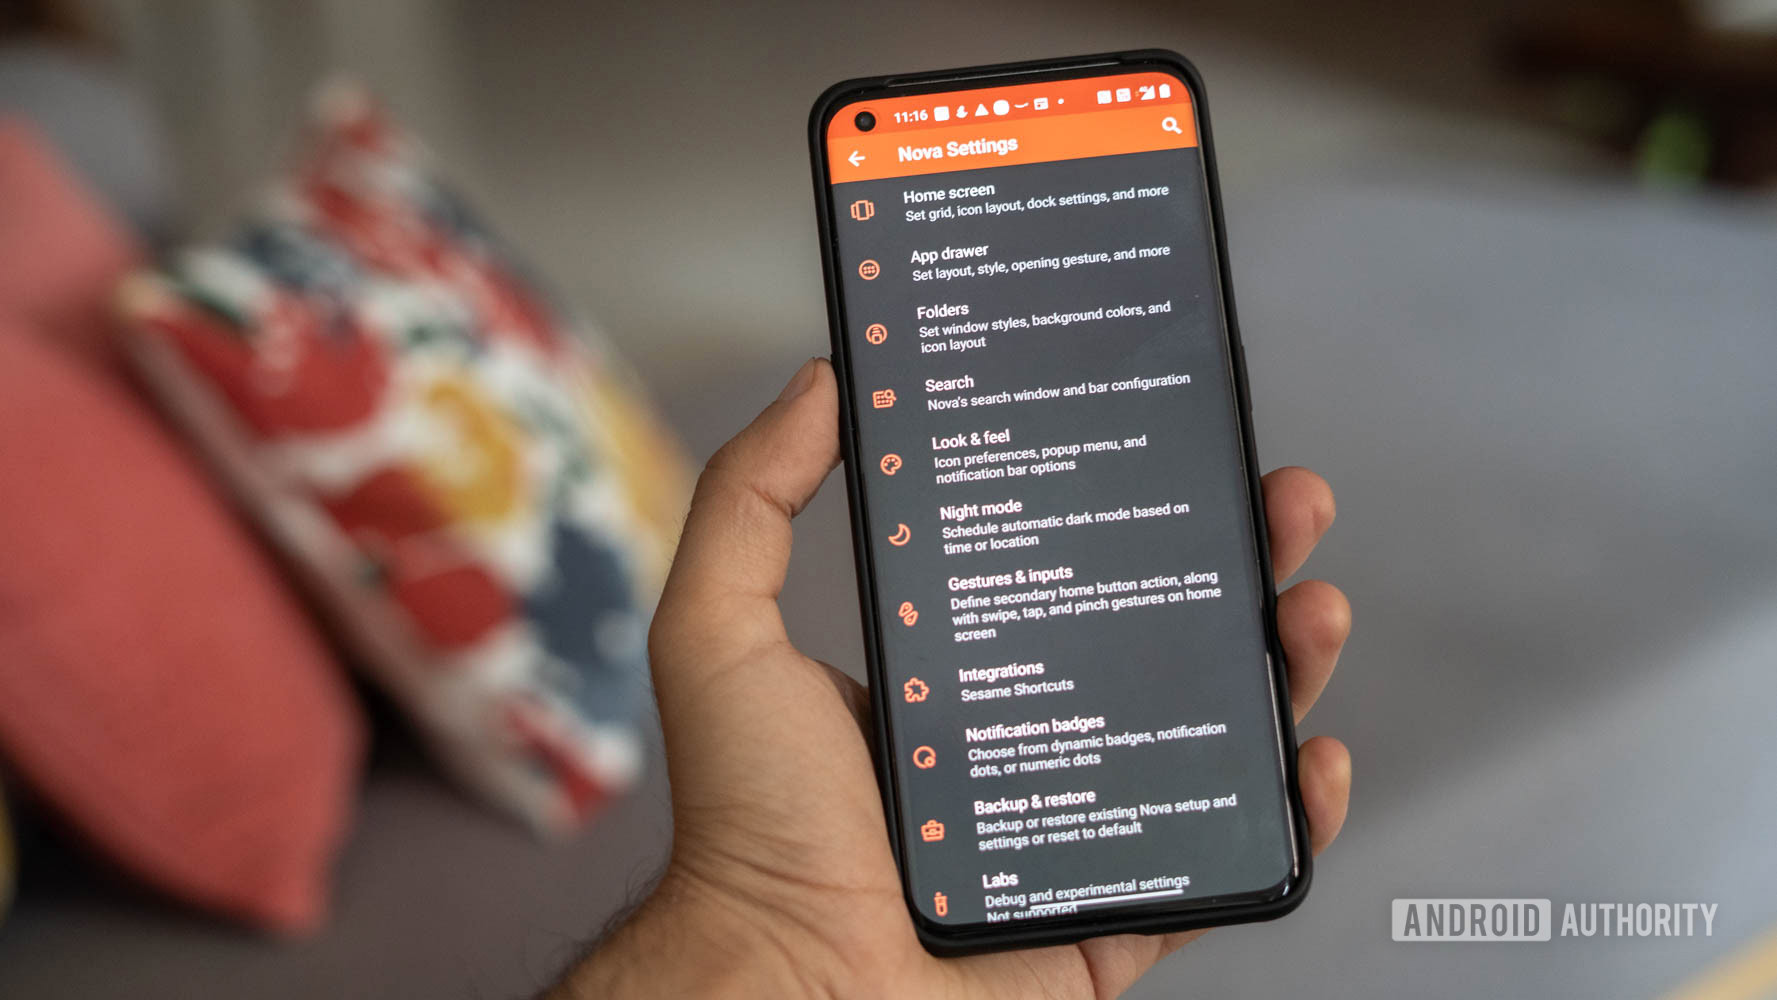 Nova Launcher Guide: What Is It, Why Use It, And More - Android Authority